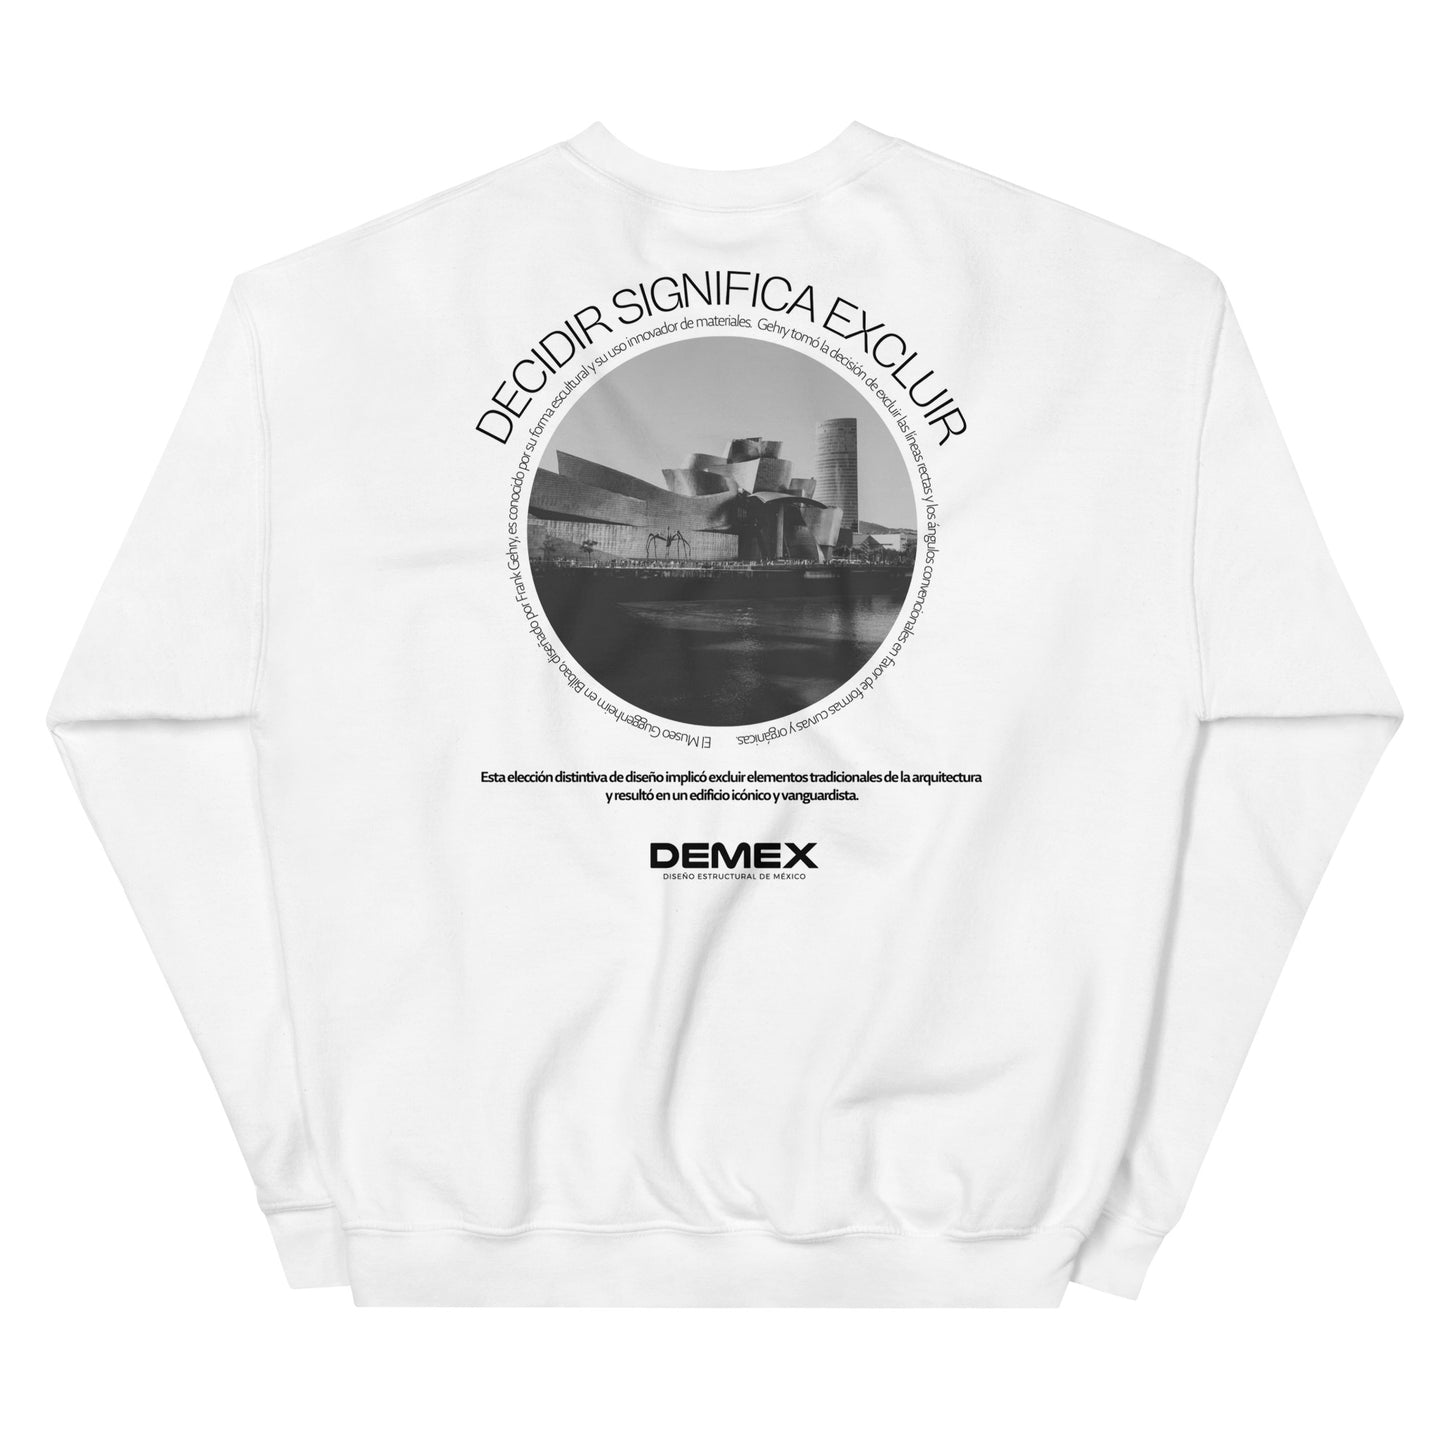 DEMEX sweatshirt "To decide means to exclude"